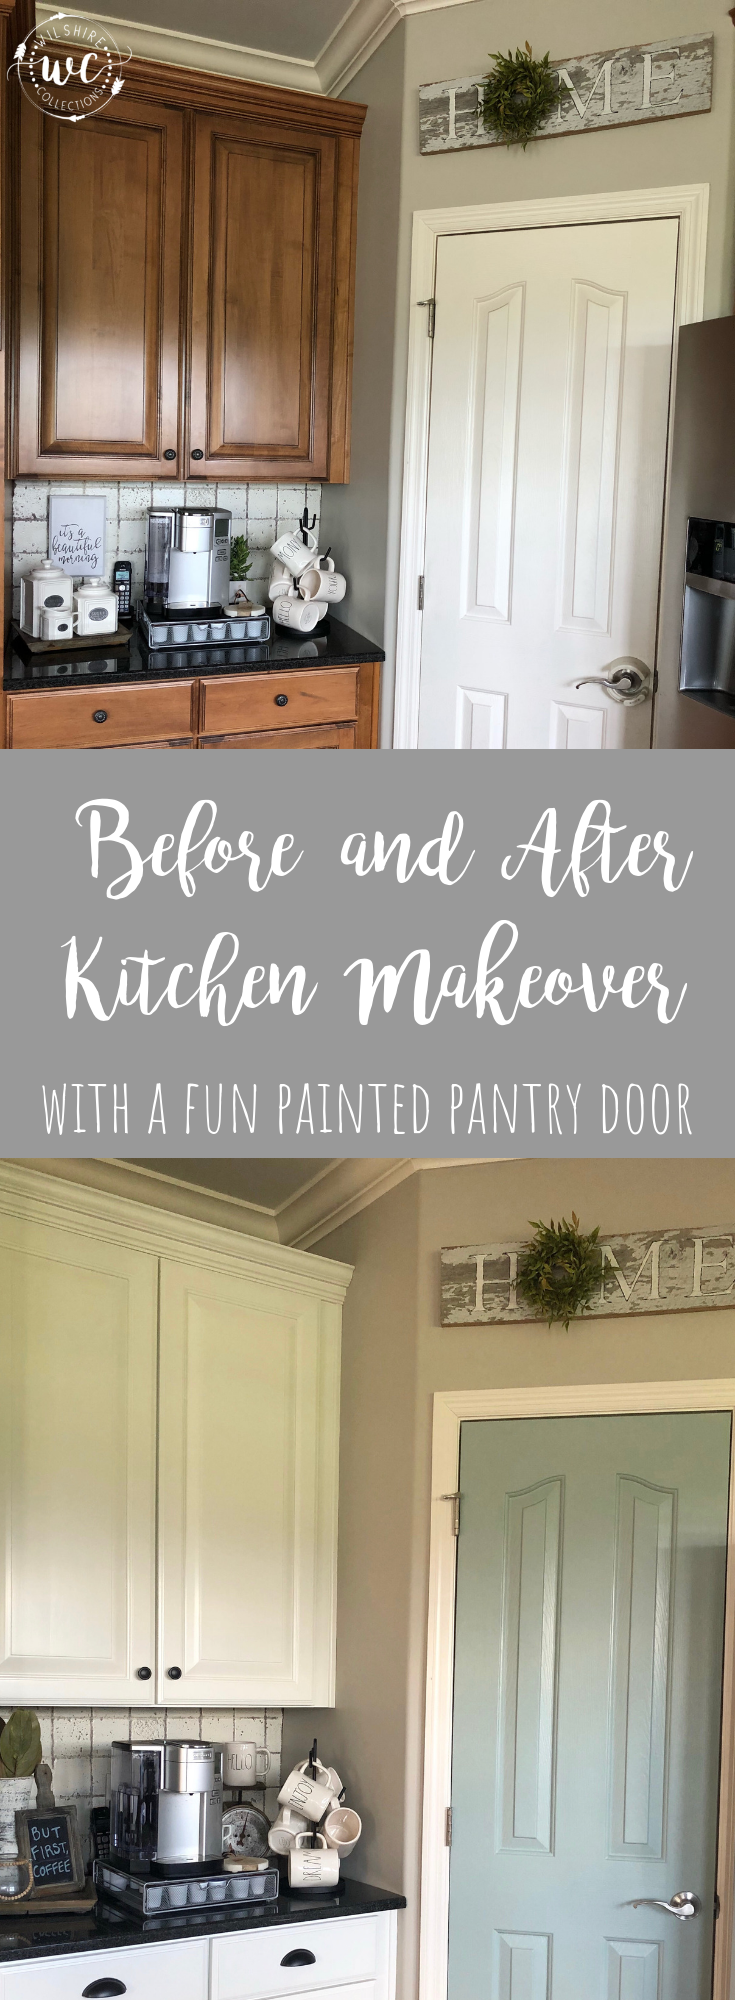 My Painted Kitchen Cabinet Makeover With A Fun Painted Pantry Door Before And After Pics  